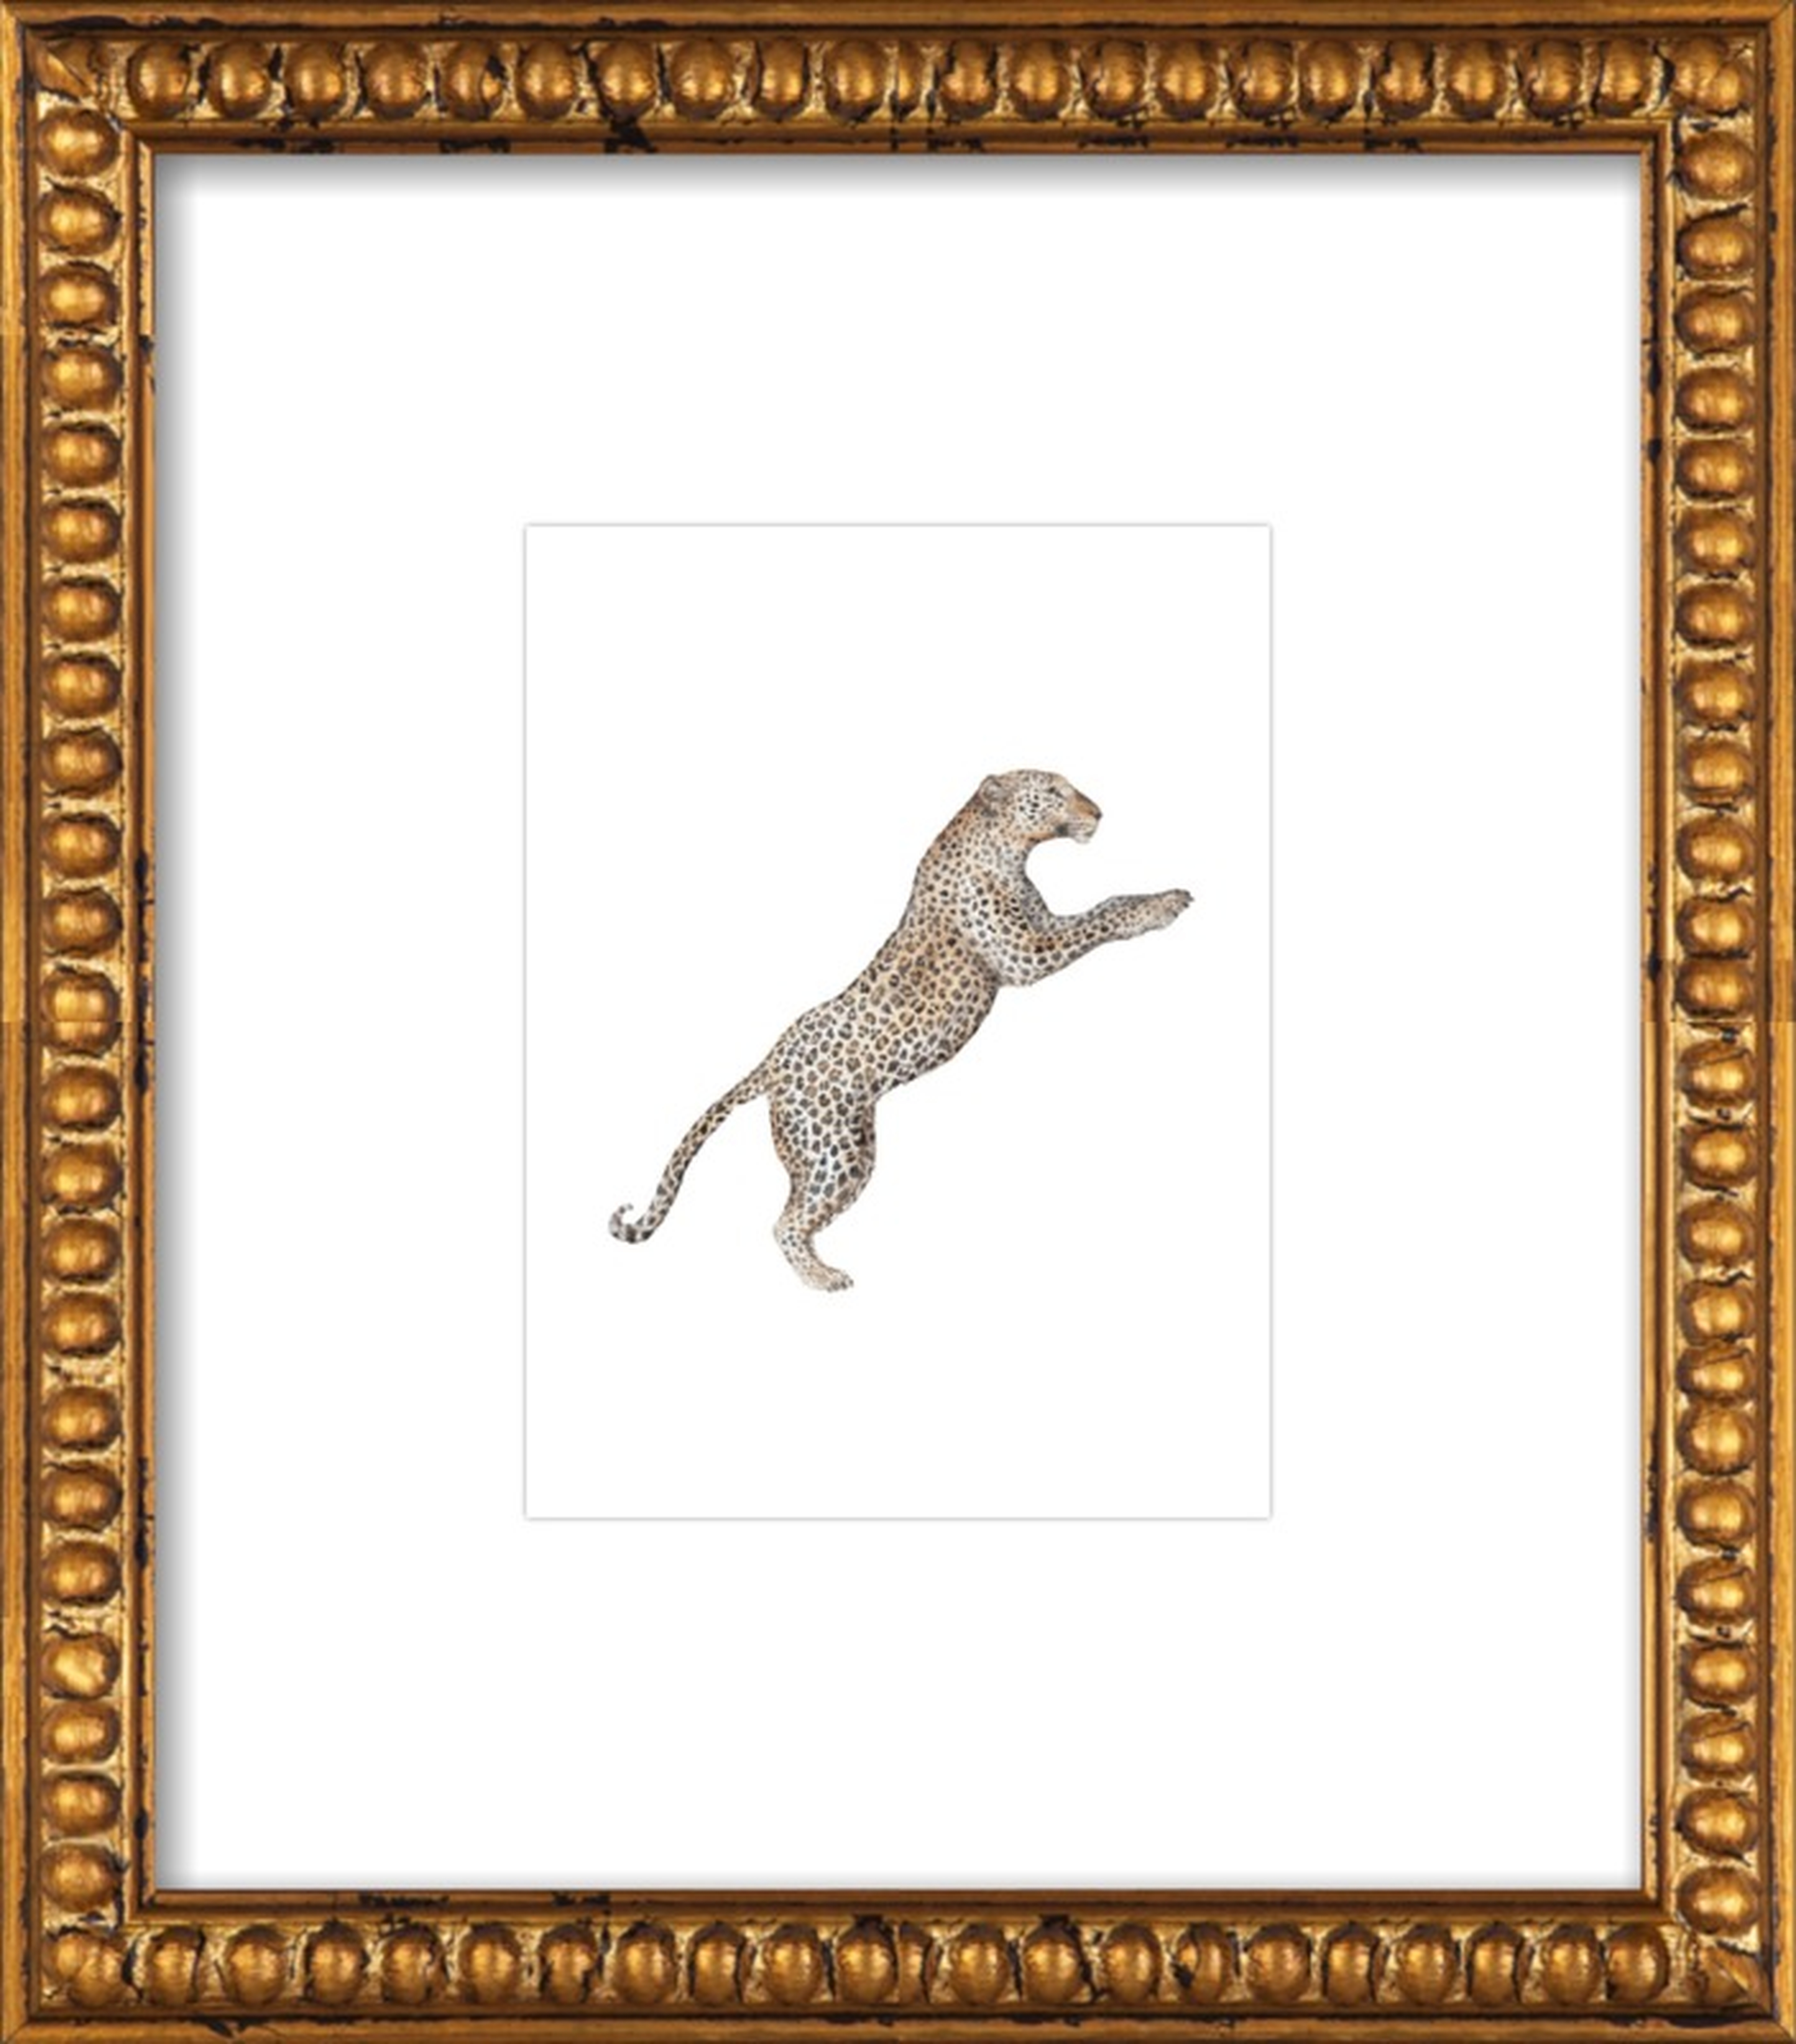 Leaping Leopard Watercolor by Lauren Rogoff - 8x10 - Gold Crackle Bead Wood with Matte - Artfully Walls